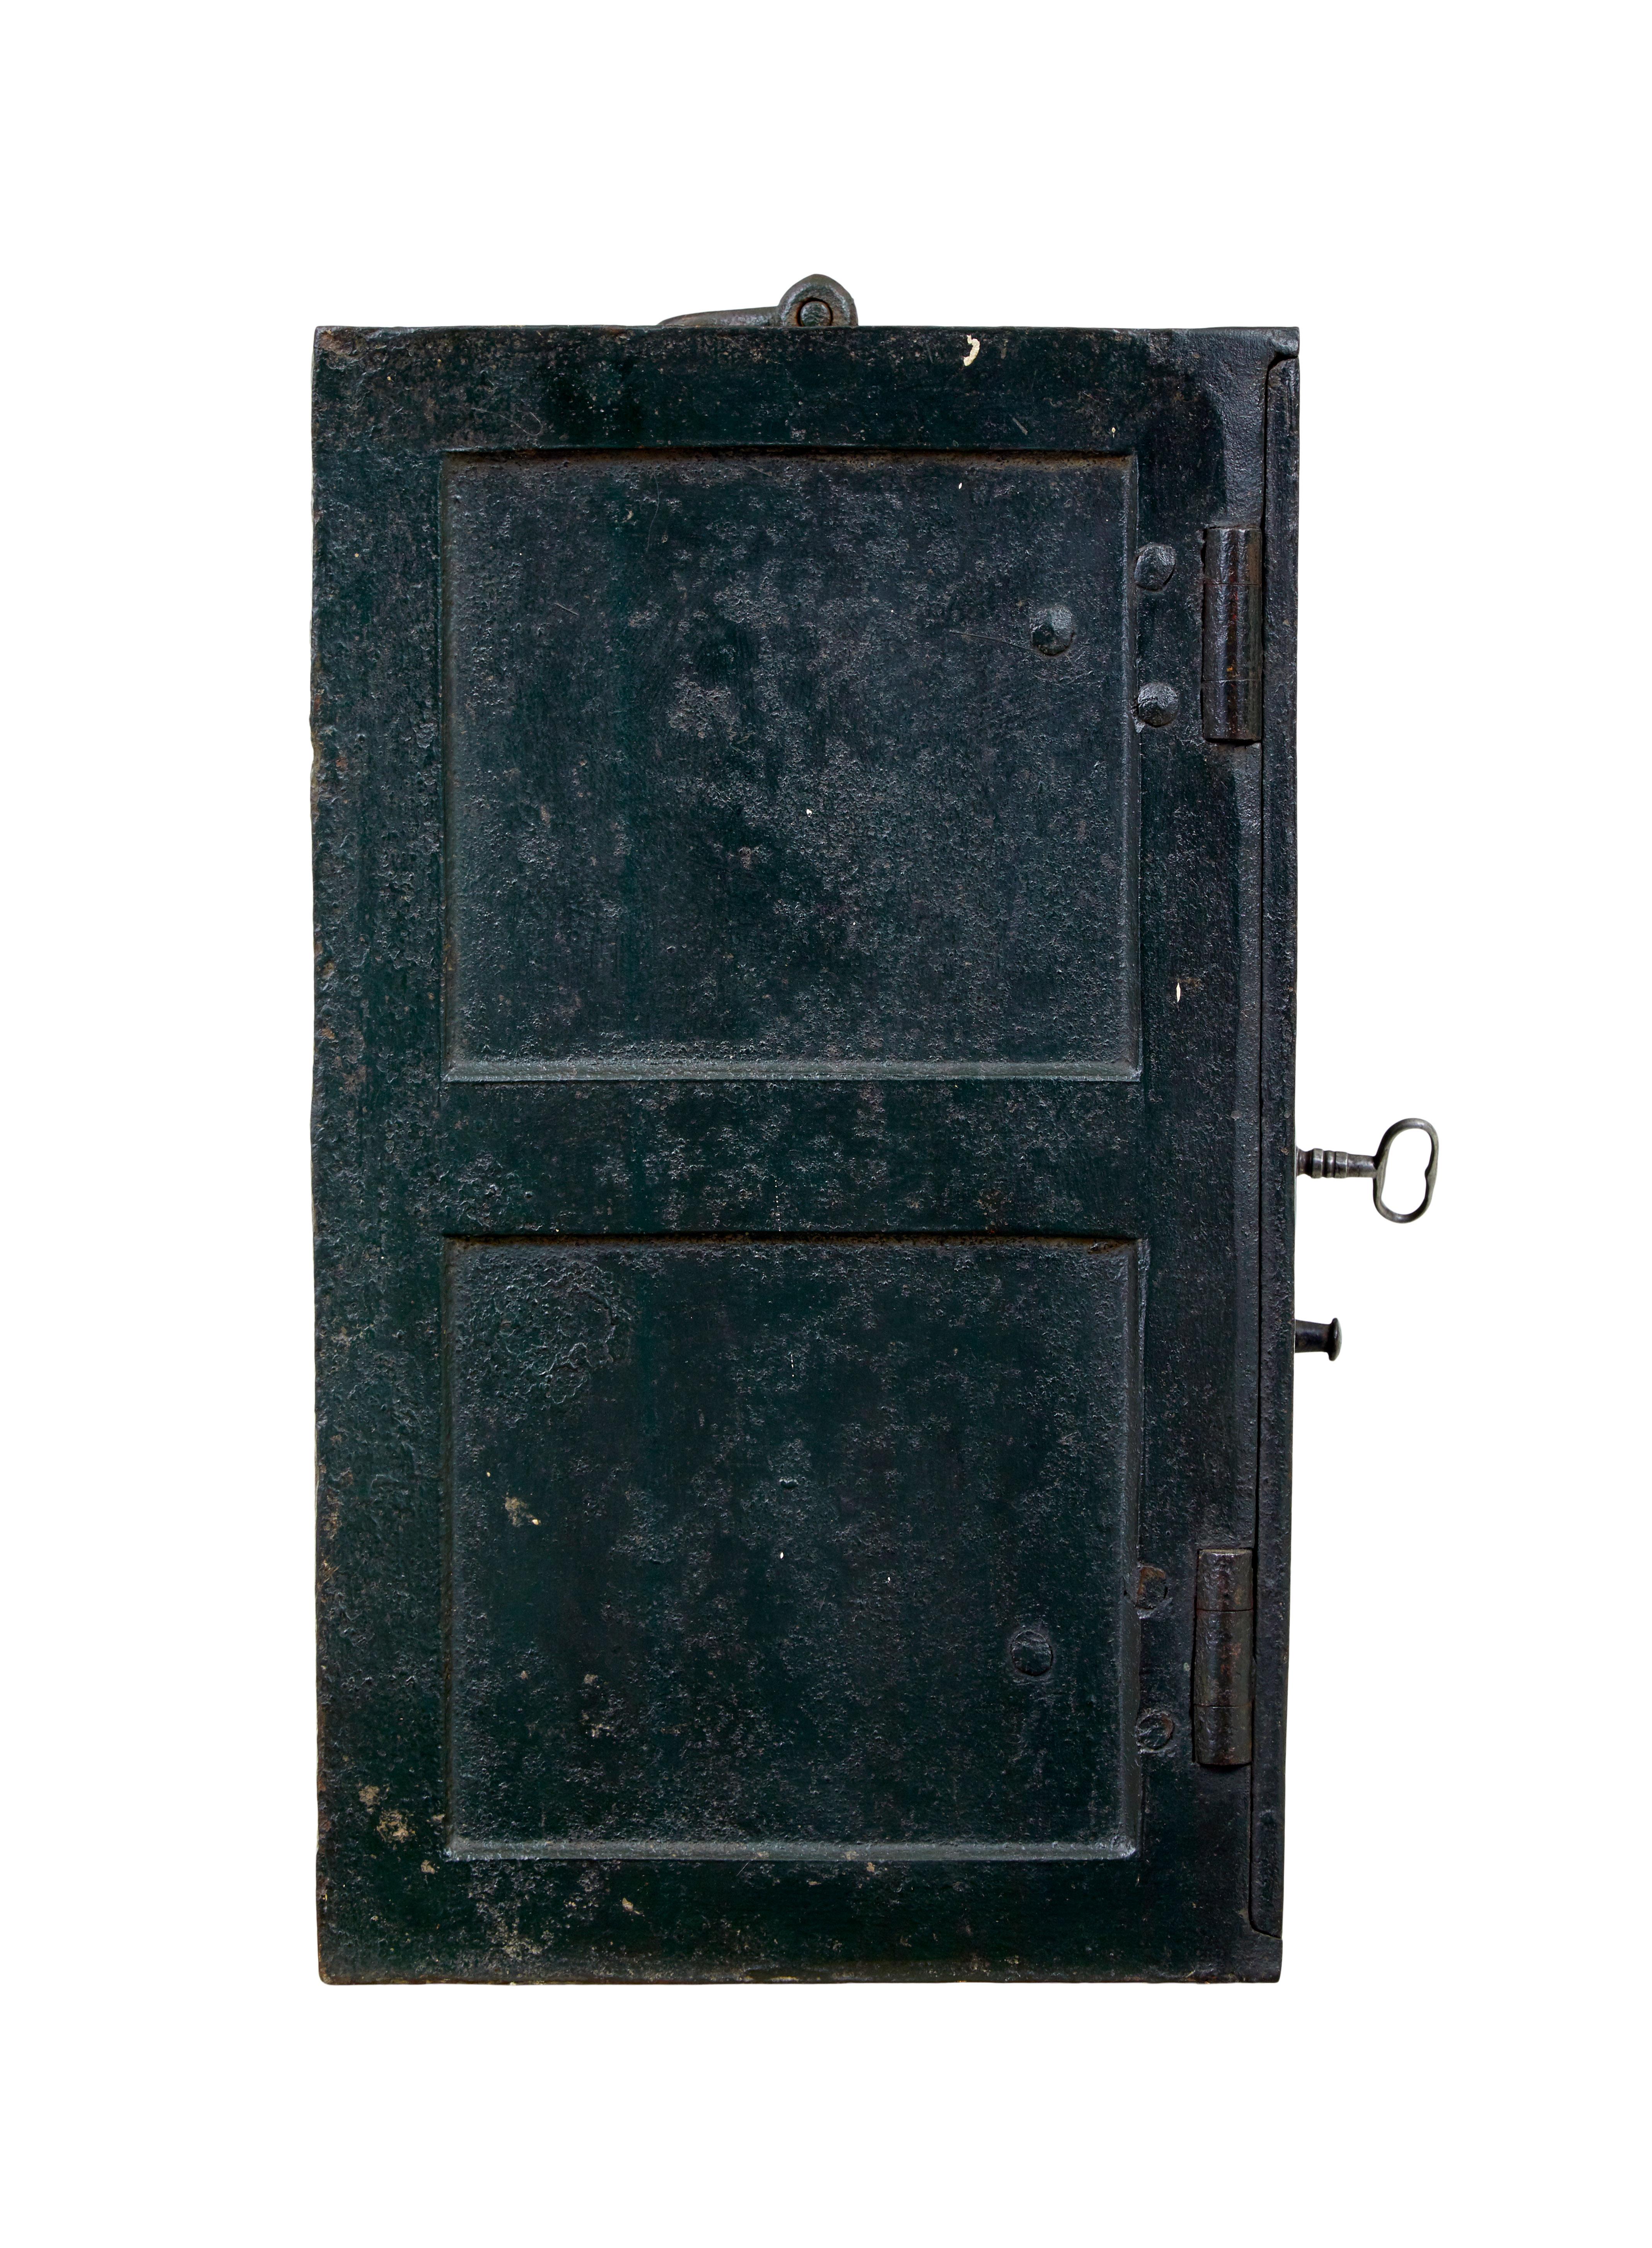 Hand-Crafted Early 19th century painted iron safe For Sale